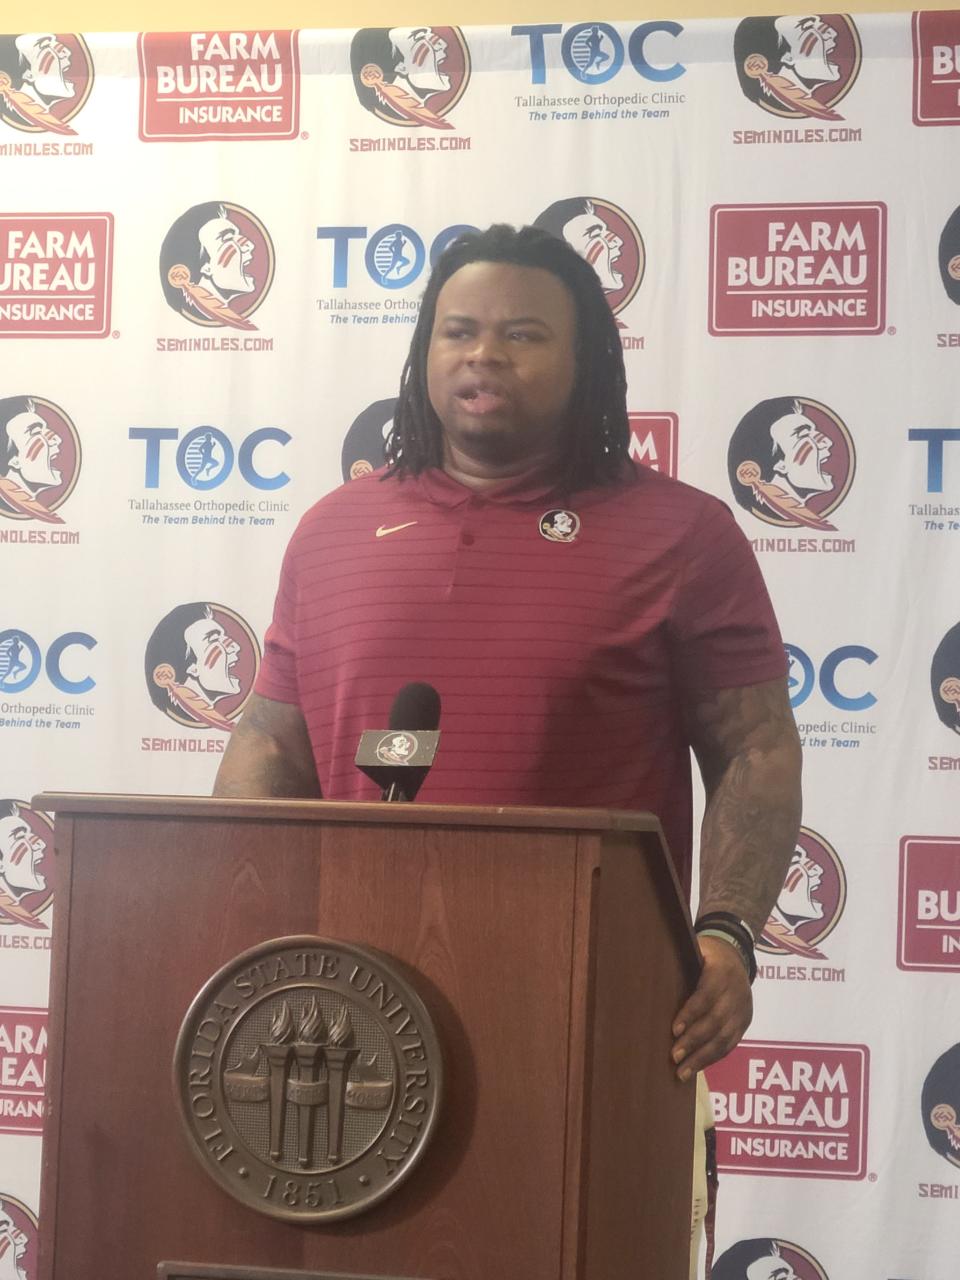 Florida State offensive lineman Keiondre Jones, a first-year transfer from Auburn, speaks during his introductory press conference on Jan. 26, 2023.